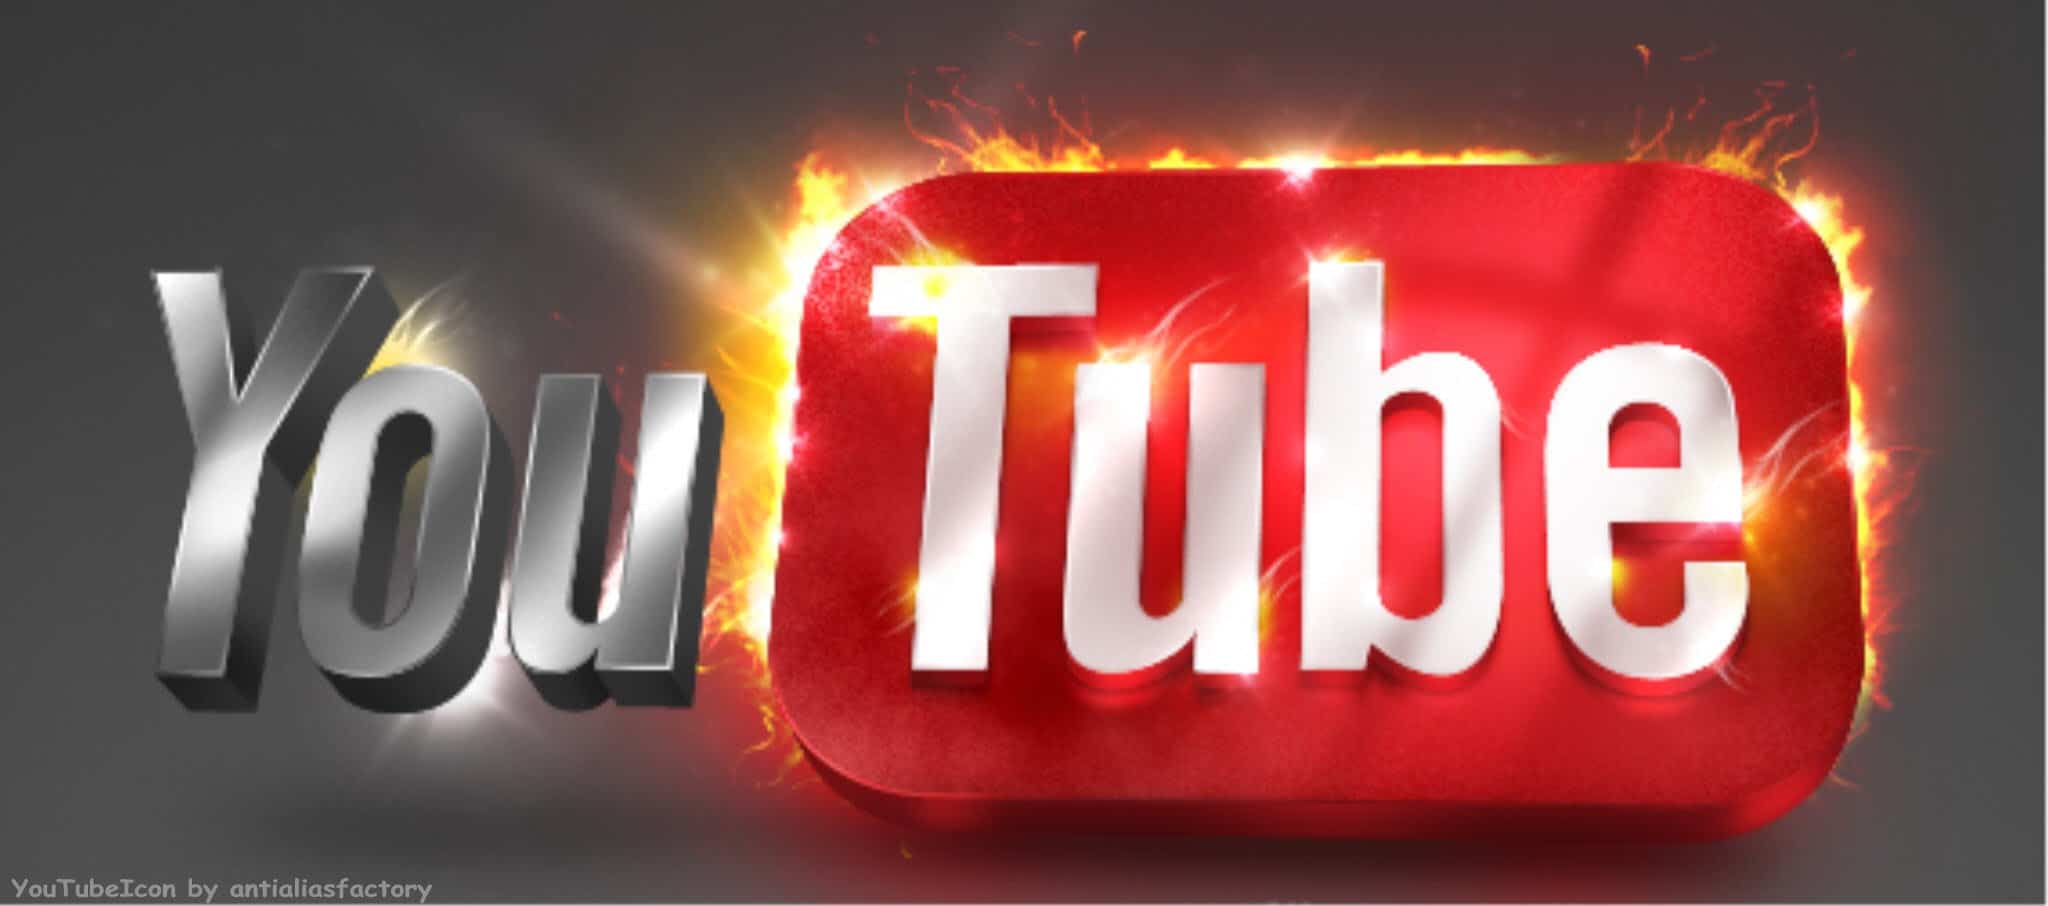 Download Videos from Youtube by Adding Magic to Url